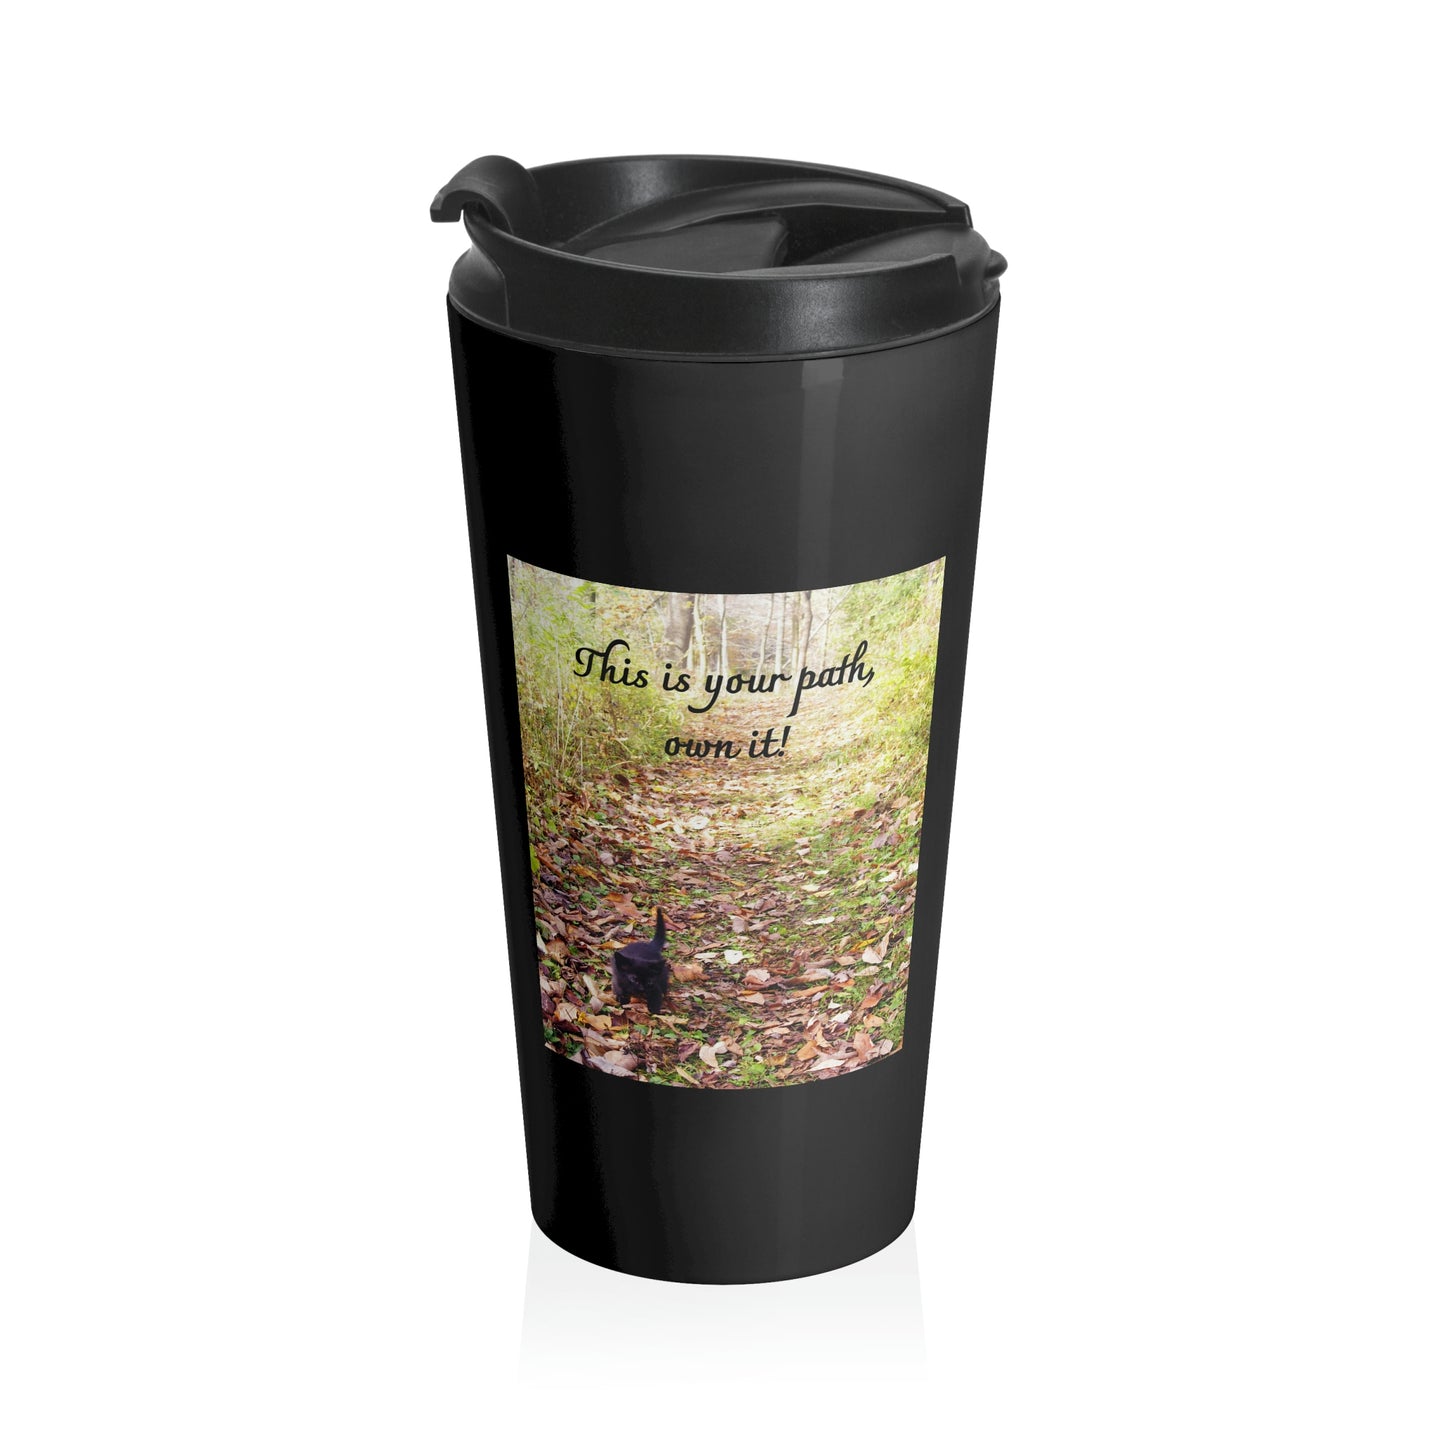 This is your path, own it! | Inspirational Motivational Quote Stainless Steel Travel Mug | 15oz | Black | Autumn Fall Woods Trail Kitten